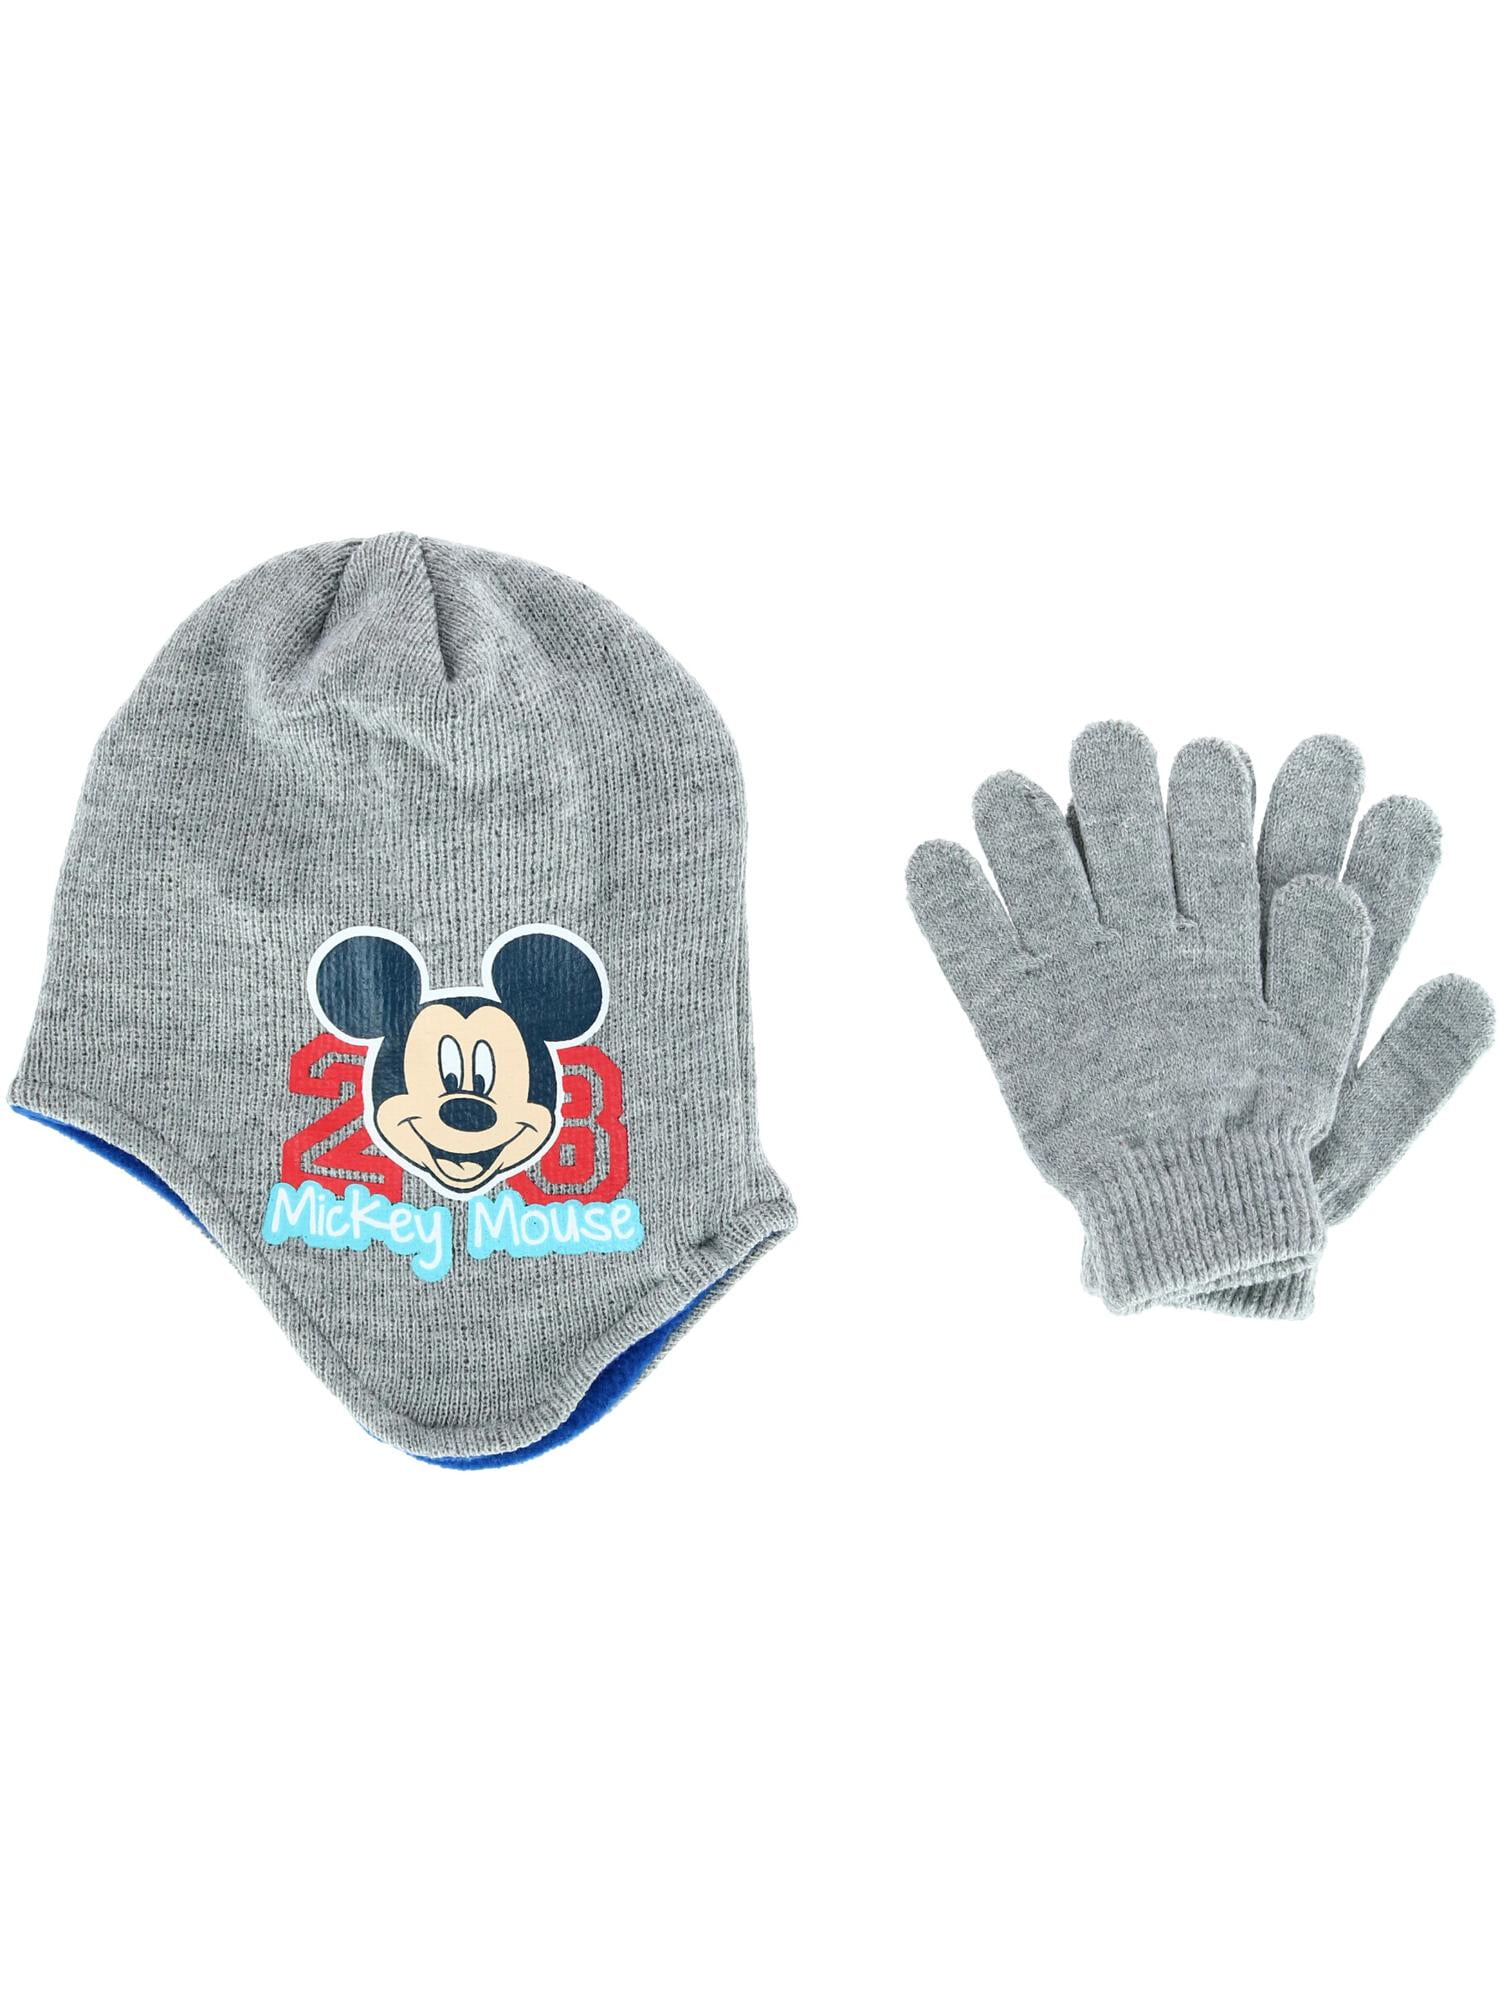 NEW GIRLS MINNIE MOUSE HAT GLOVE & SCARF SET SIZE 3-8 YEARS 